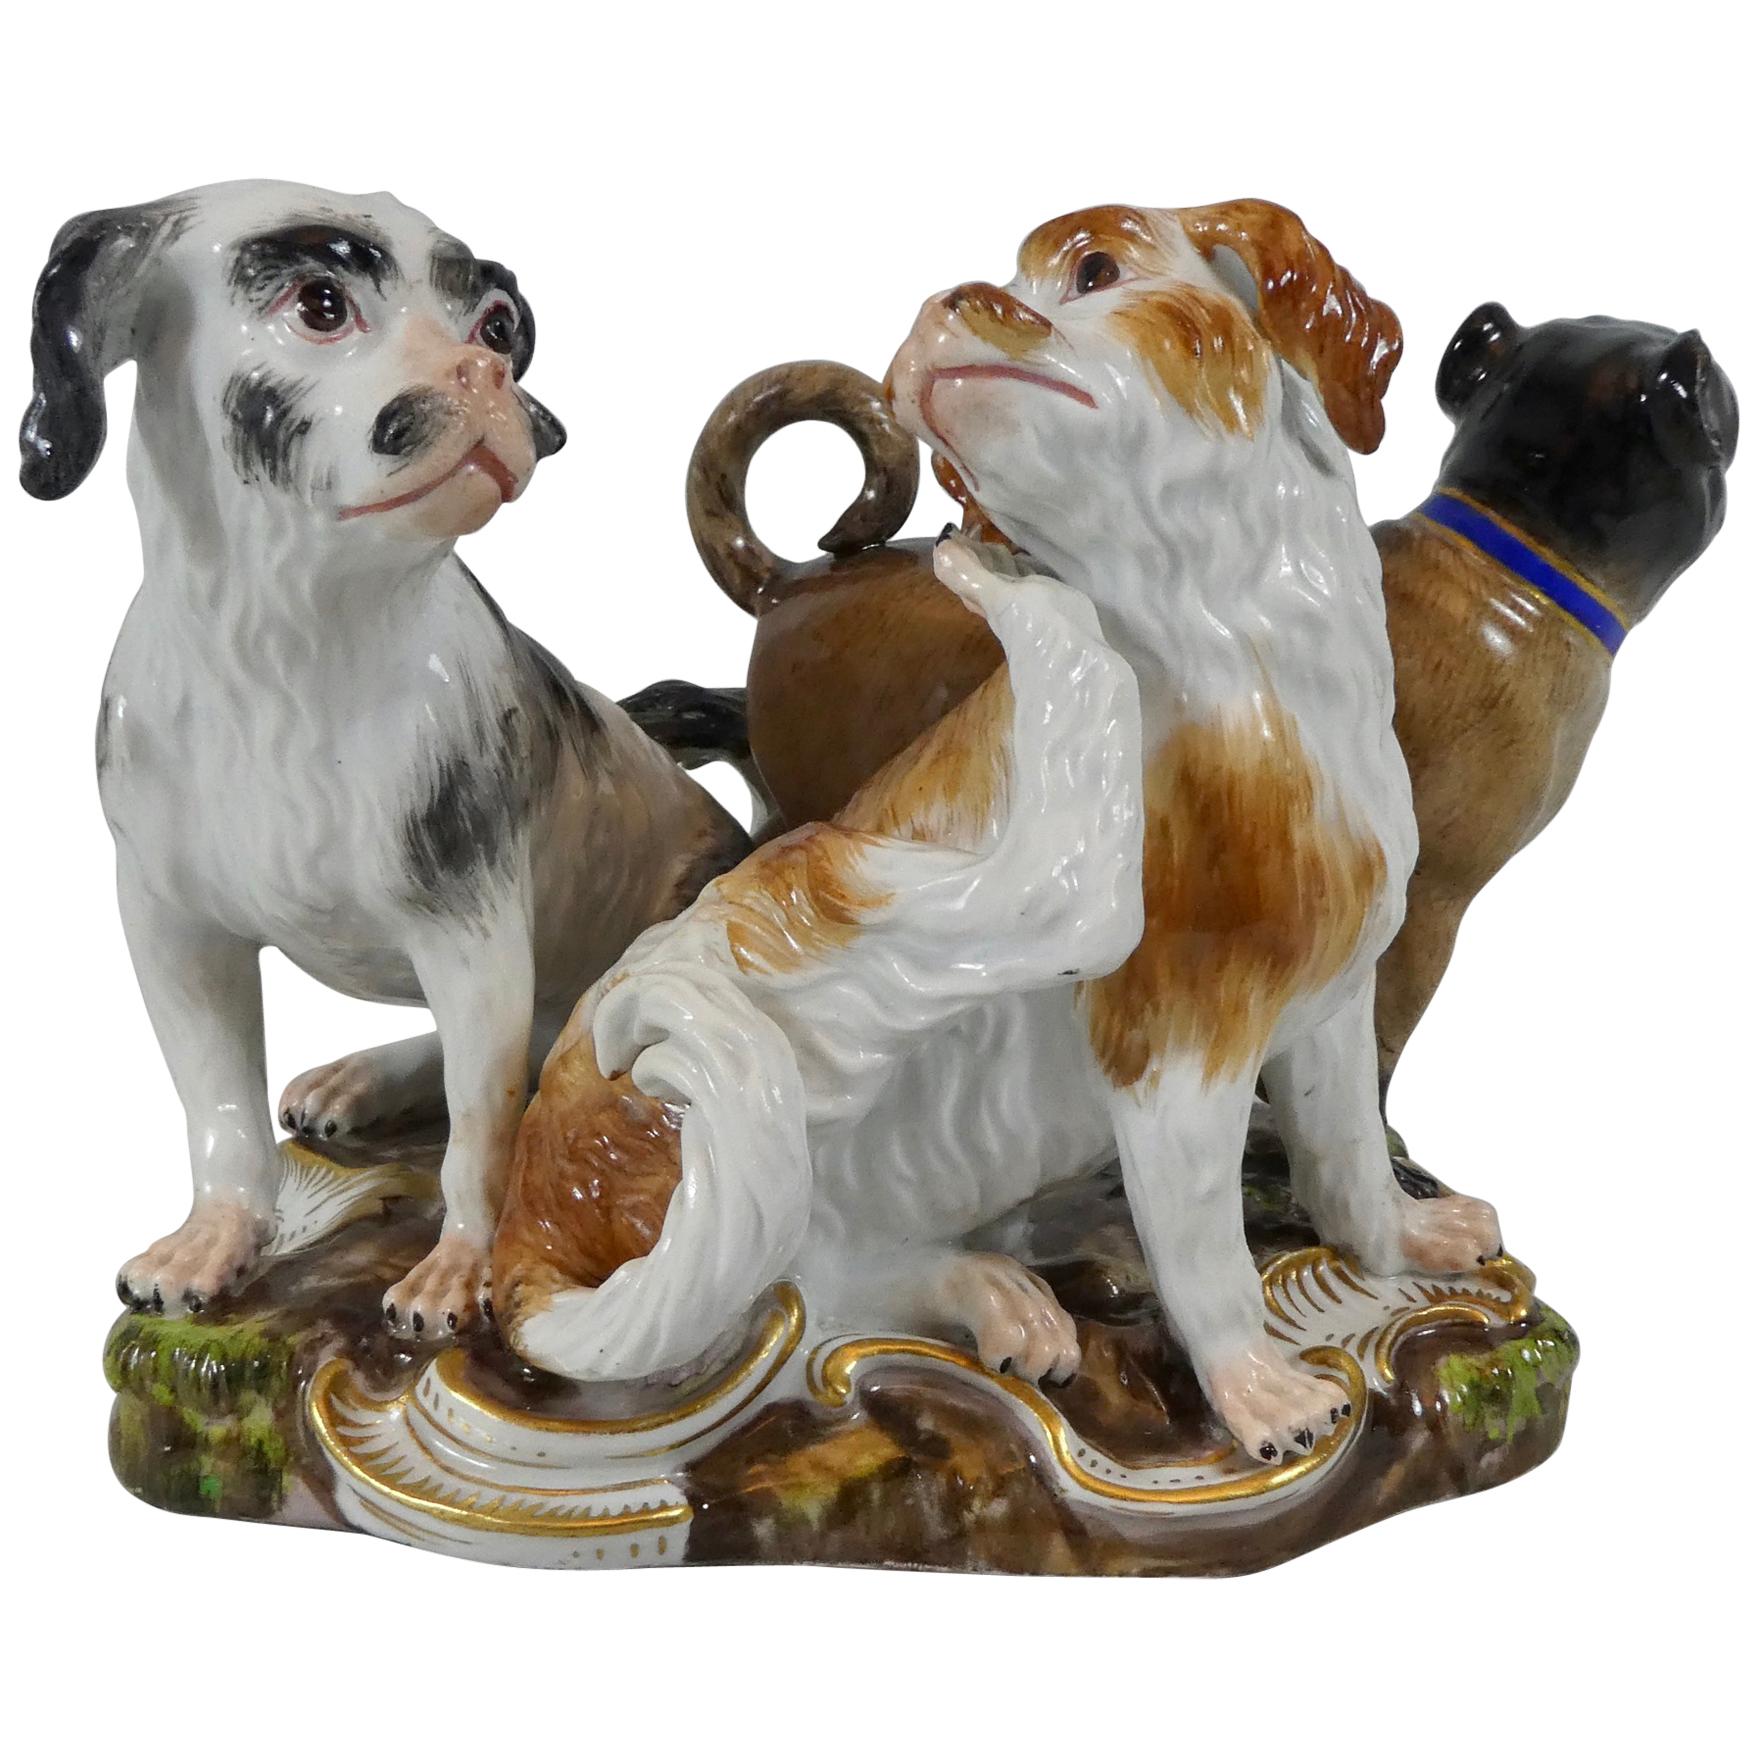 Meissen Porcelain Group of Dogs, circa 1860